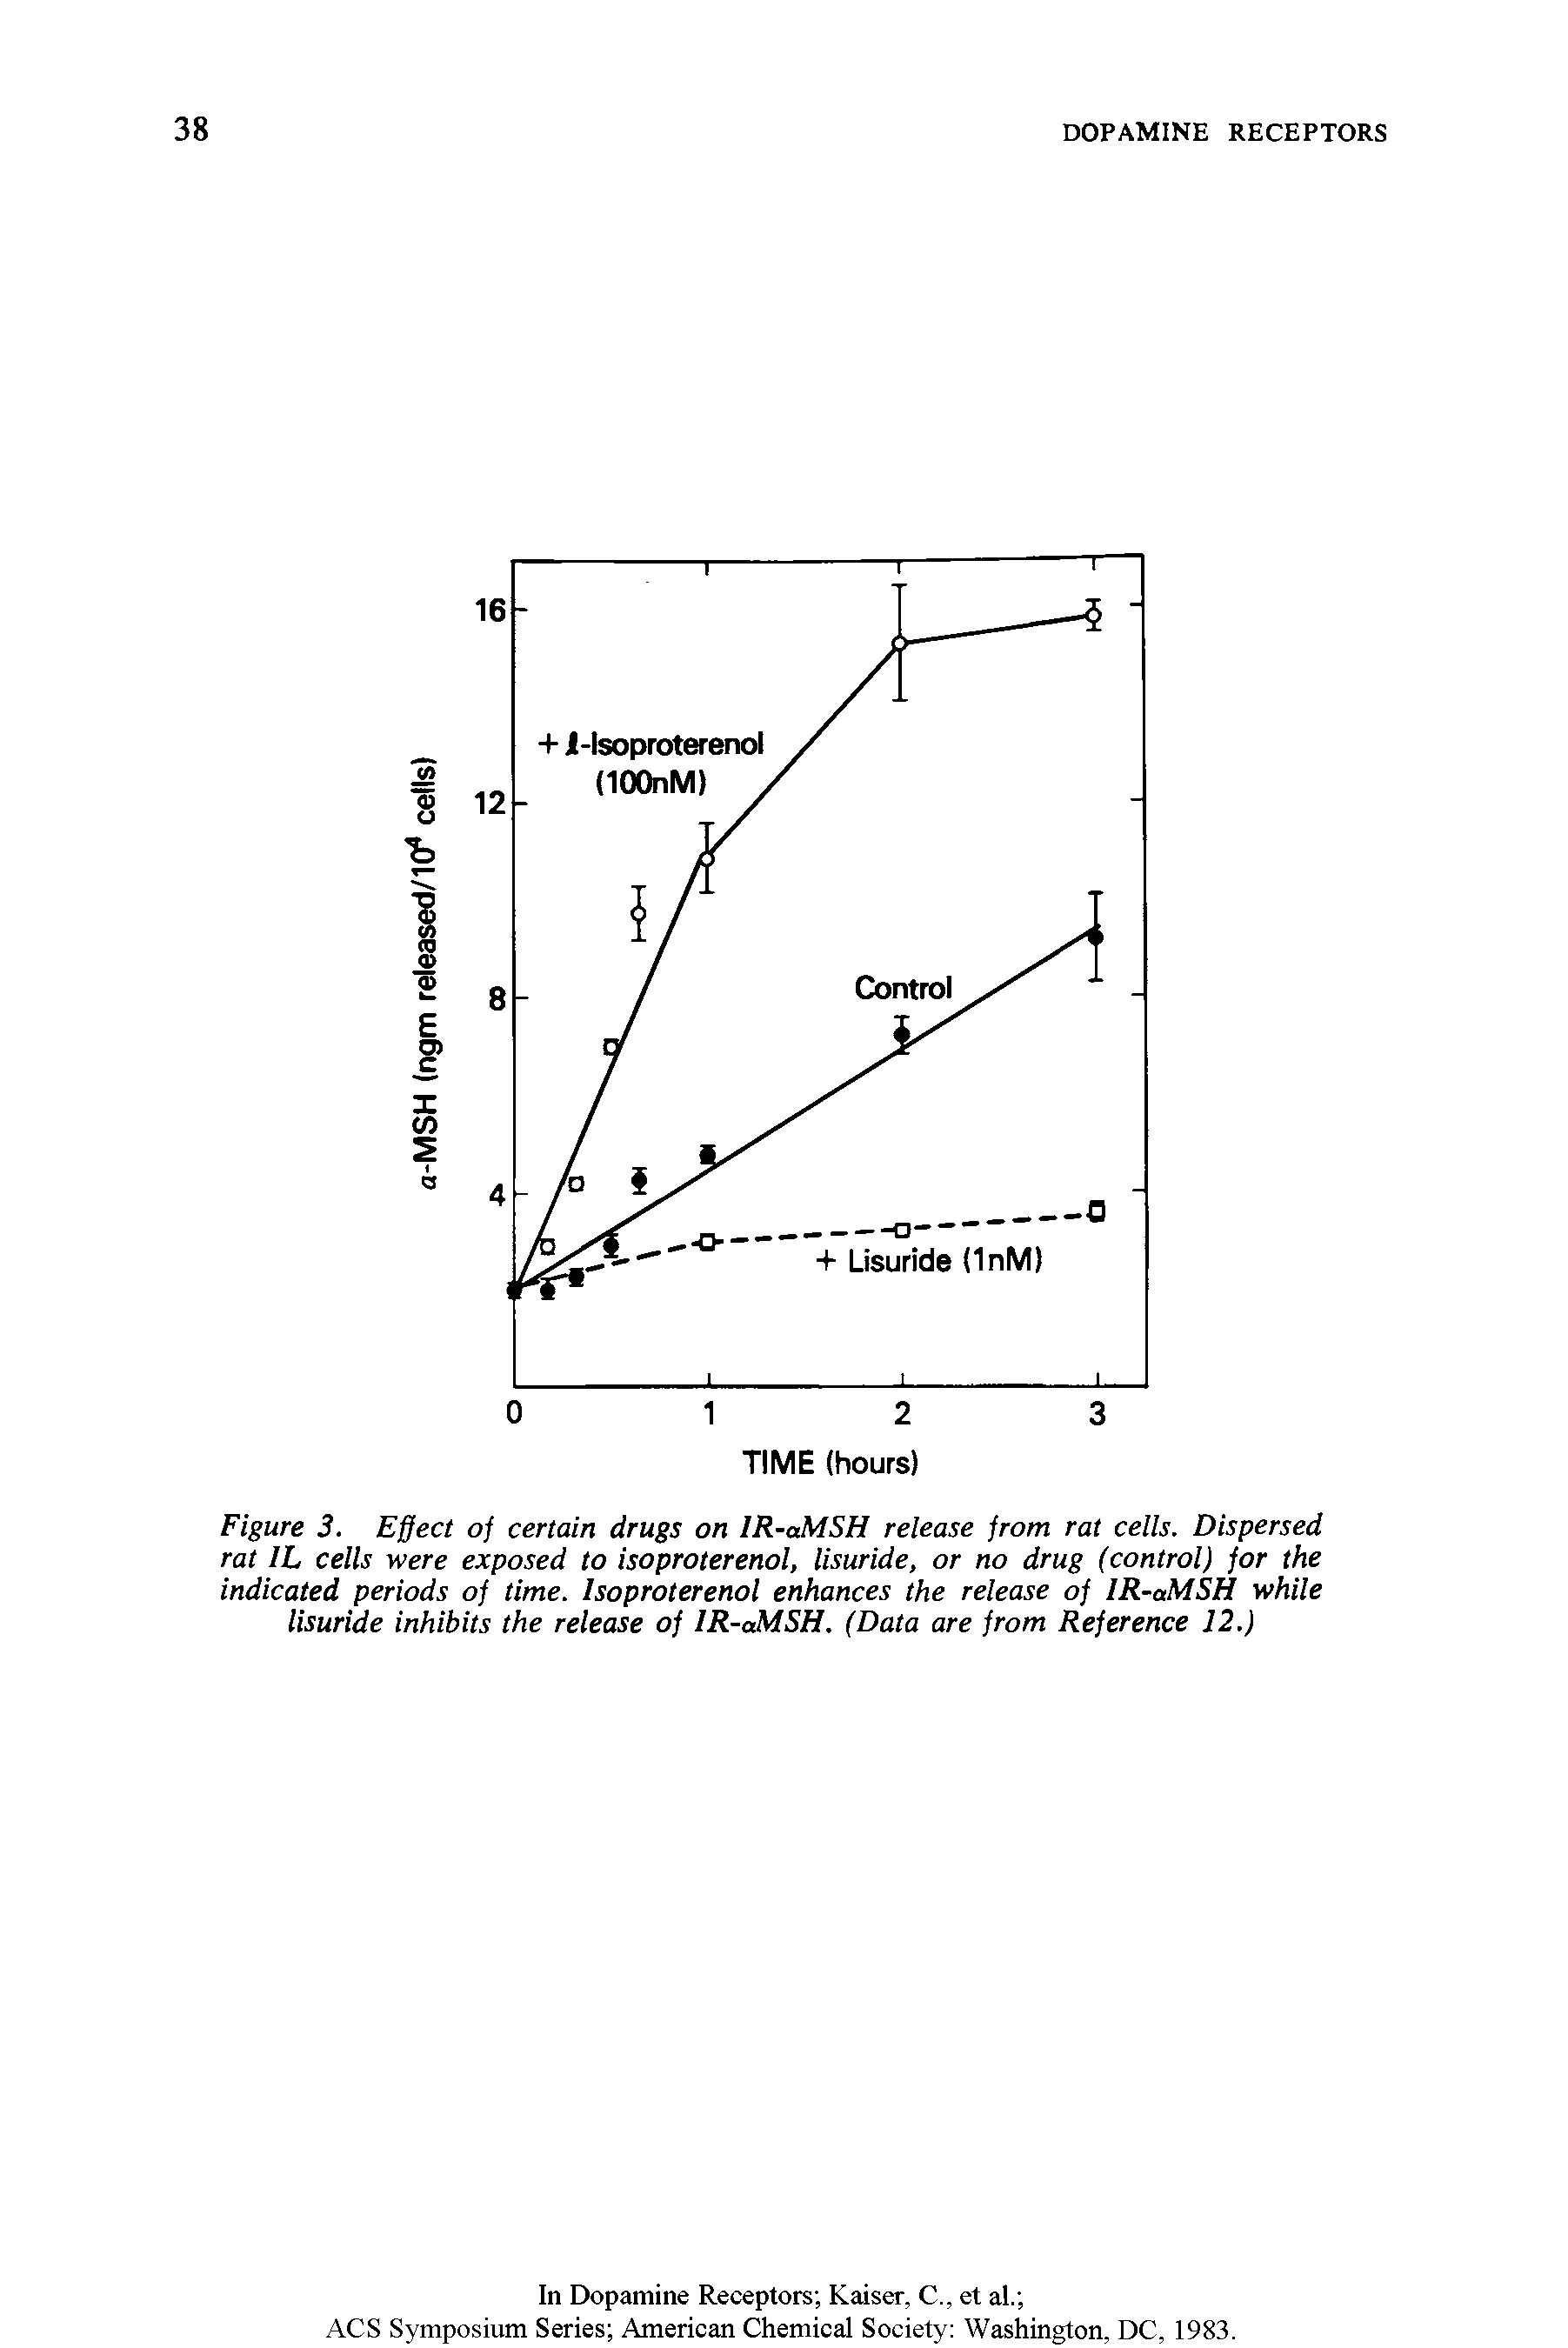 Figure 3. Effect of certain drugs on IR-aMSH release from rat cells. Dispersed rat 1L cells were exposed to isoproterenol, lisuride, or no drug (control) for the indicated periods of time. Isoproterenol enhances the release of IR-aMSH while lisuride inhibits the release of IR-aMSH. (Data are from Reference 12.)...